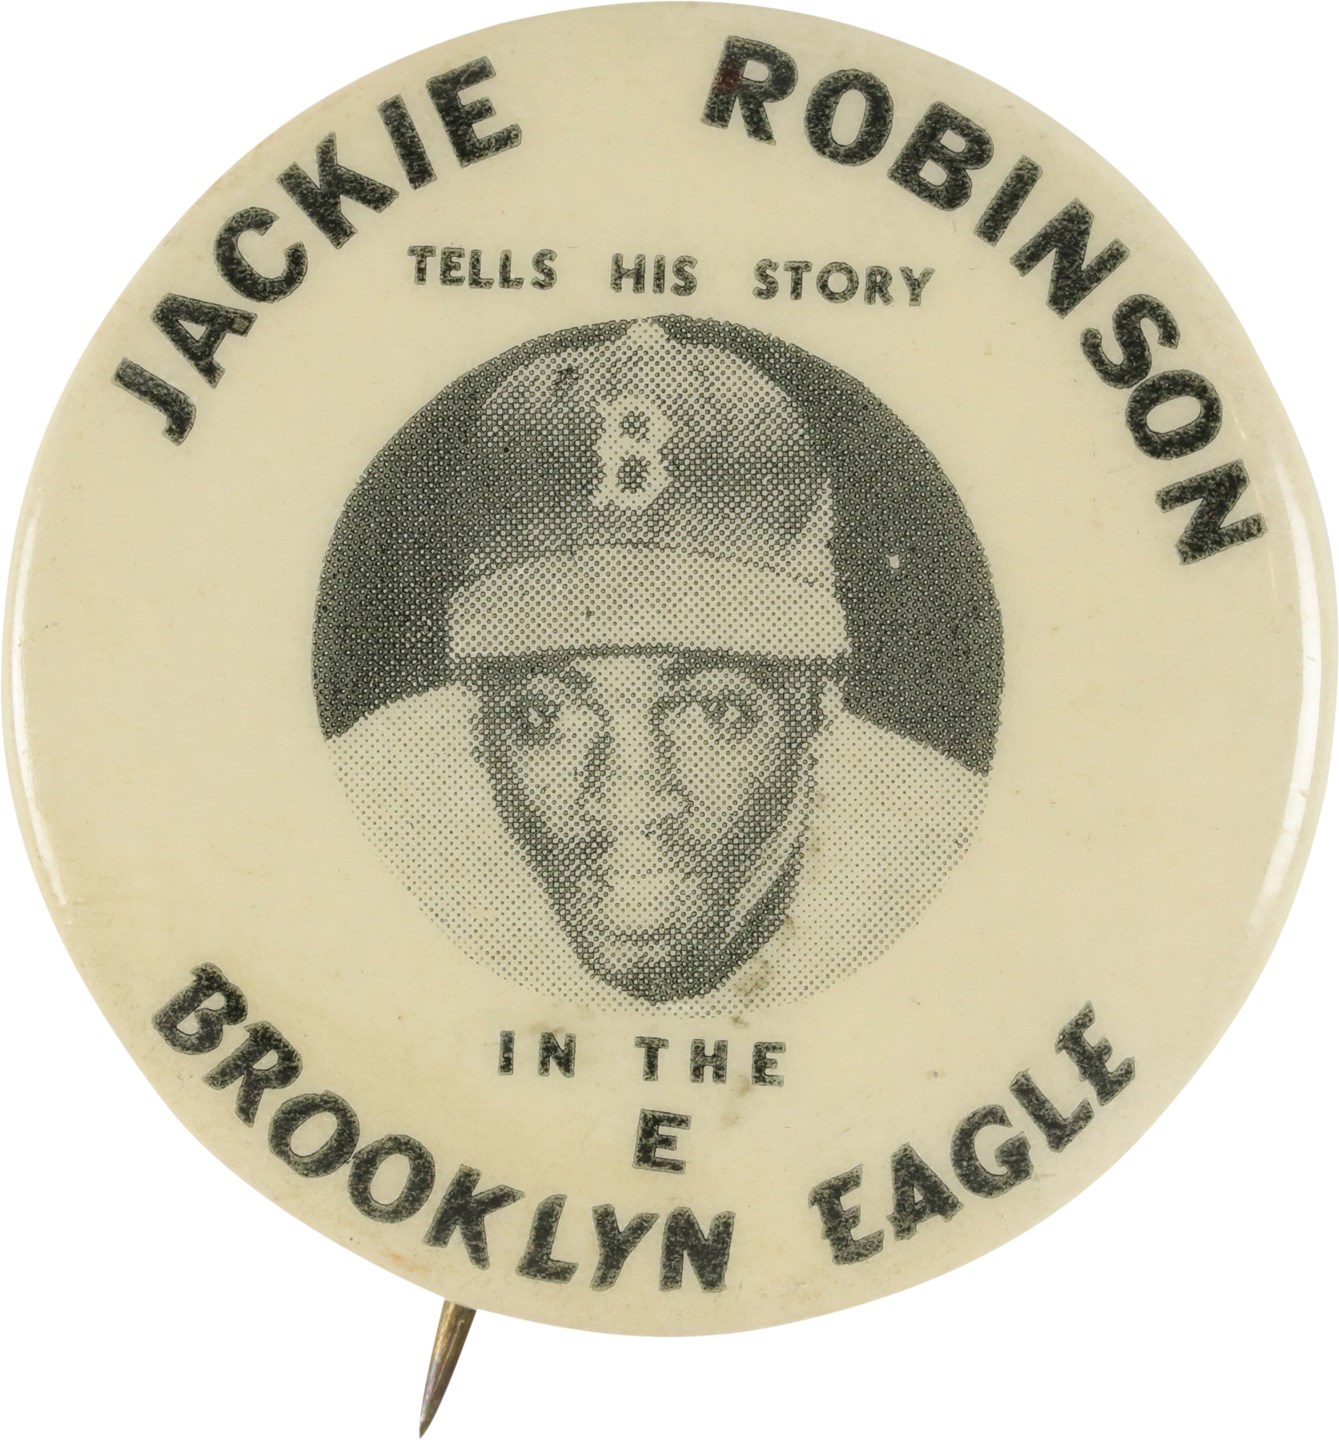 - Rare 1947 "Jackie Robinson Tells His Story in the Brooklyn Eagle" Pin